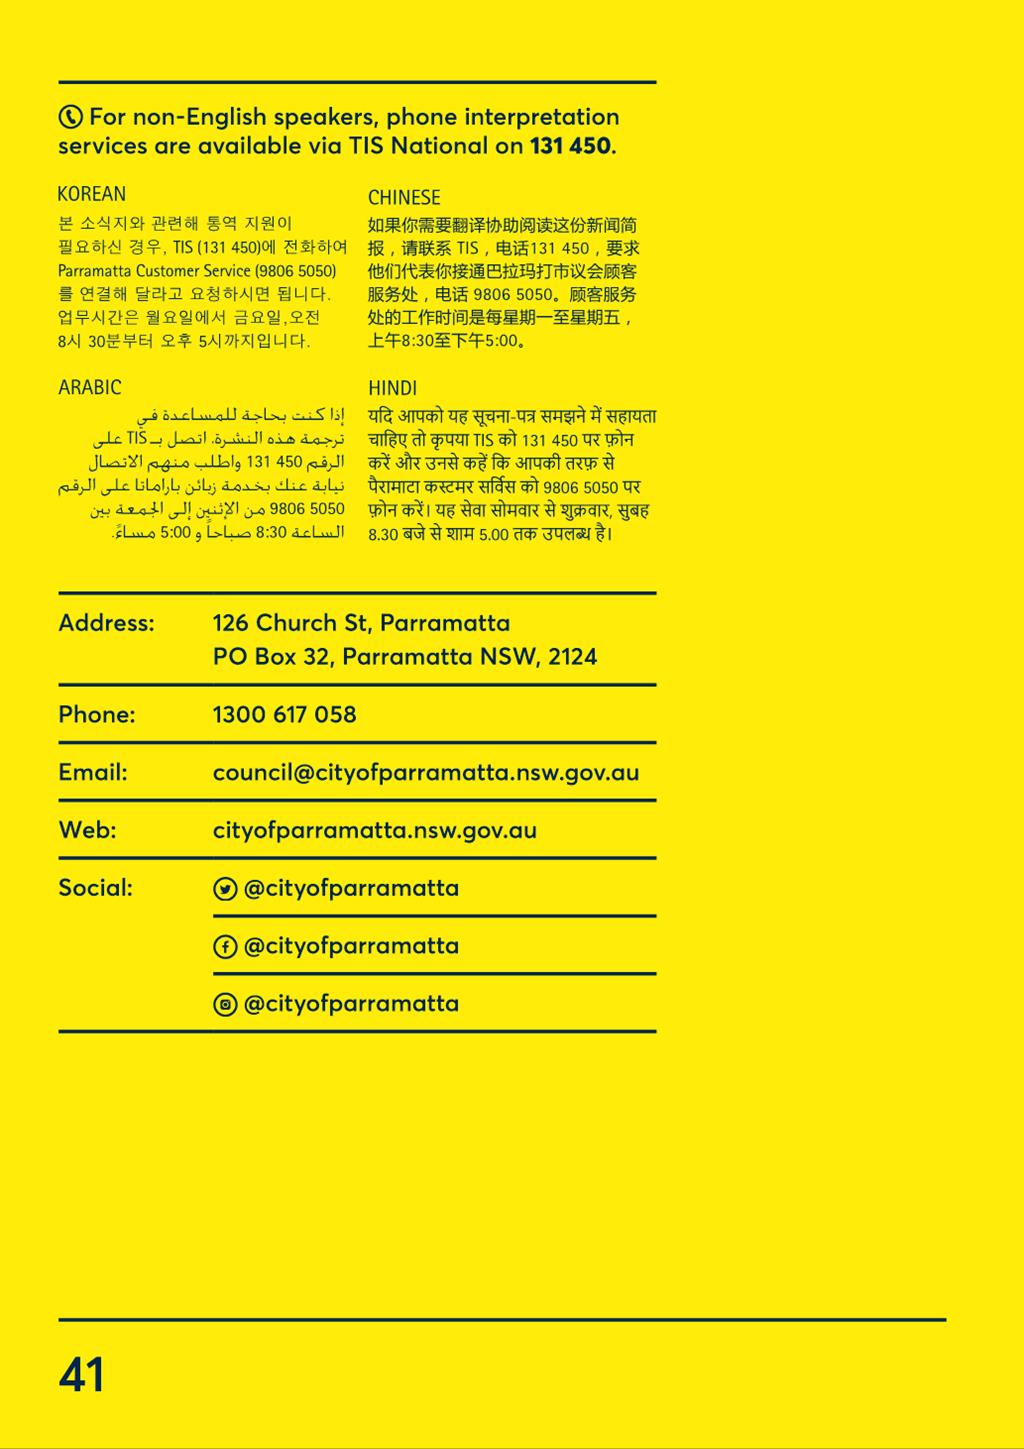 A yellow paper with black text

Description automatically generated